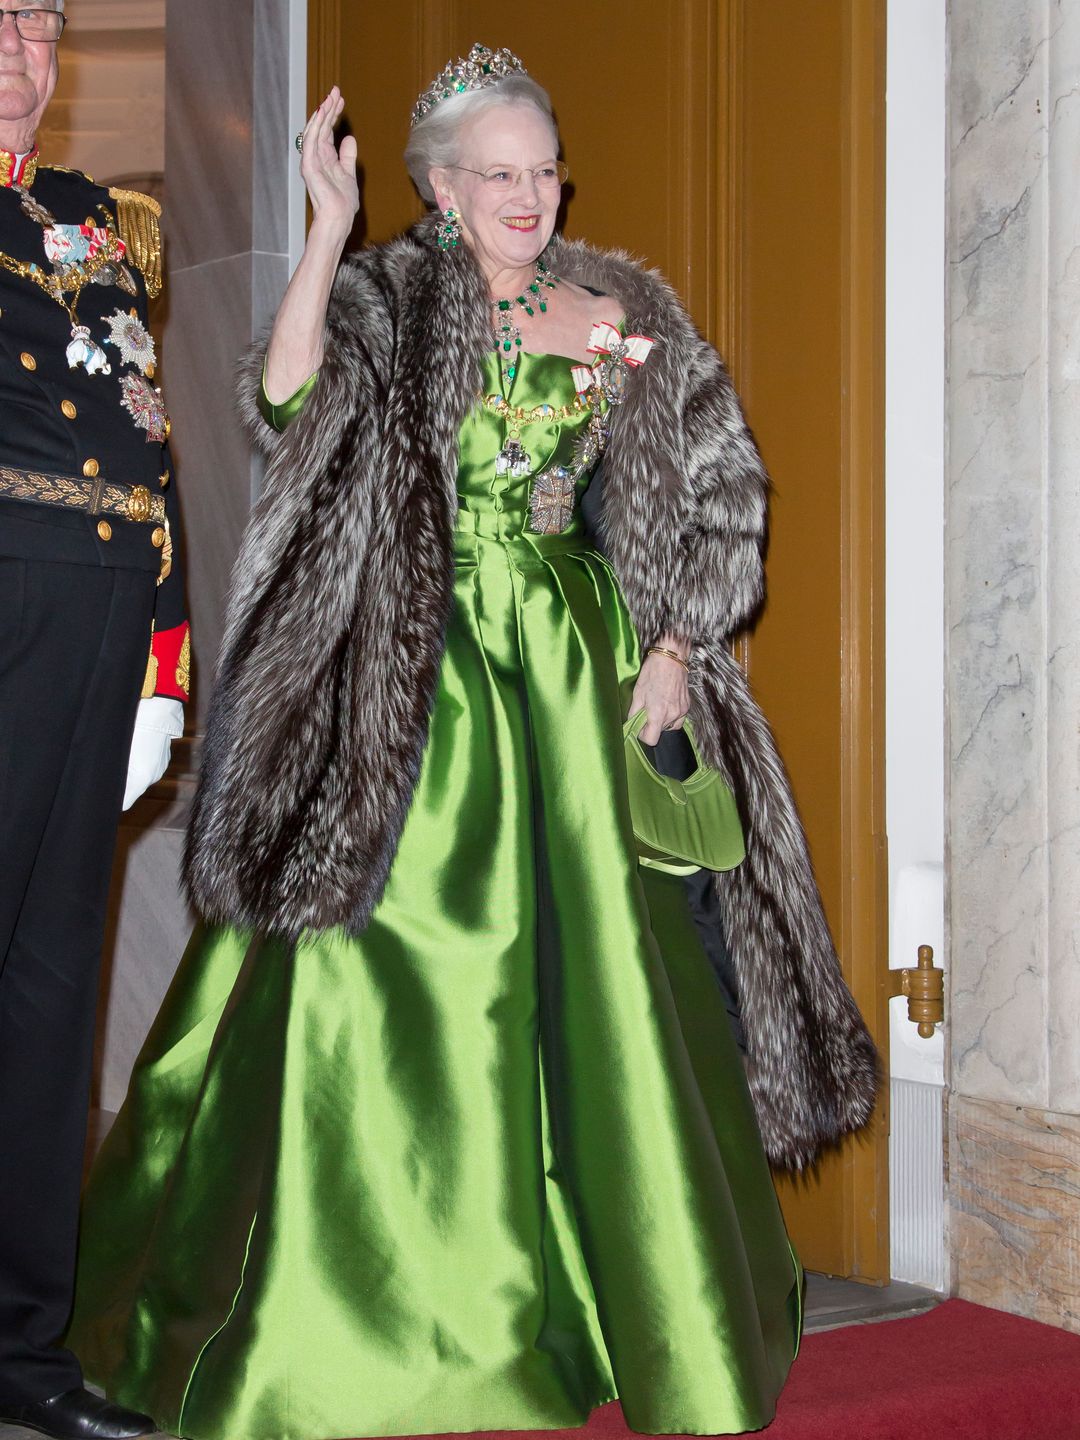 Queen Margrethe wears a mettalic green gown to attend the Traditional New Year's Banquet